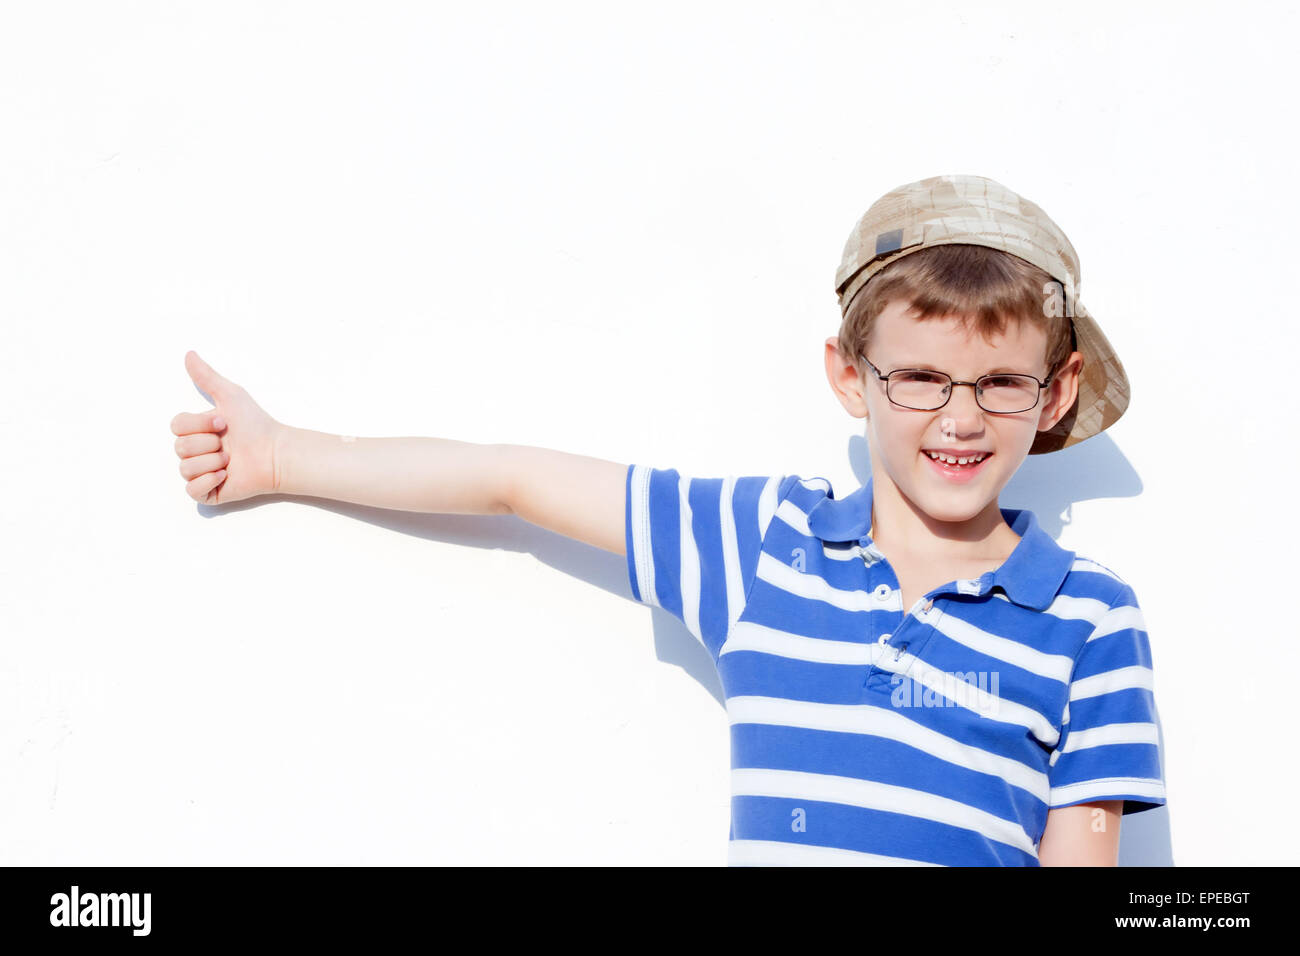 a little boy aged 6 to 8 years old with glasses and a cap showing a positive gesture.portrait Stock Photo